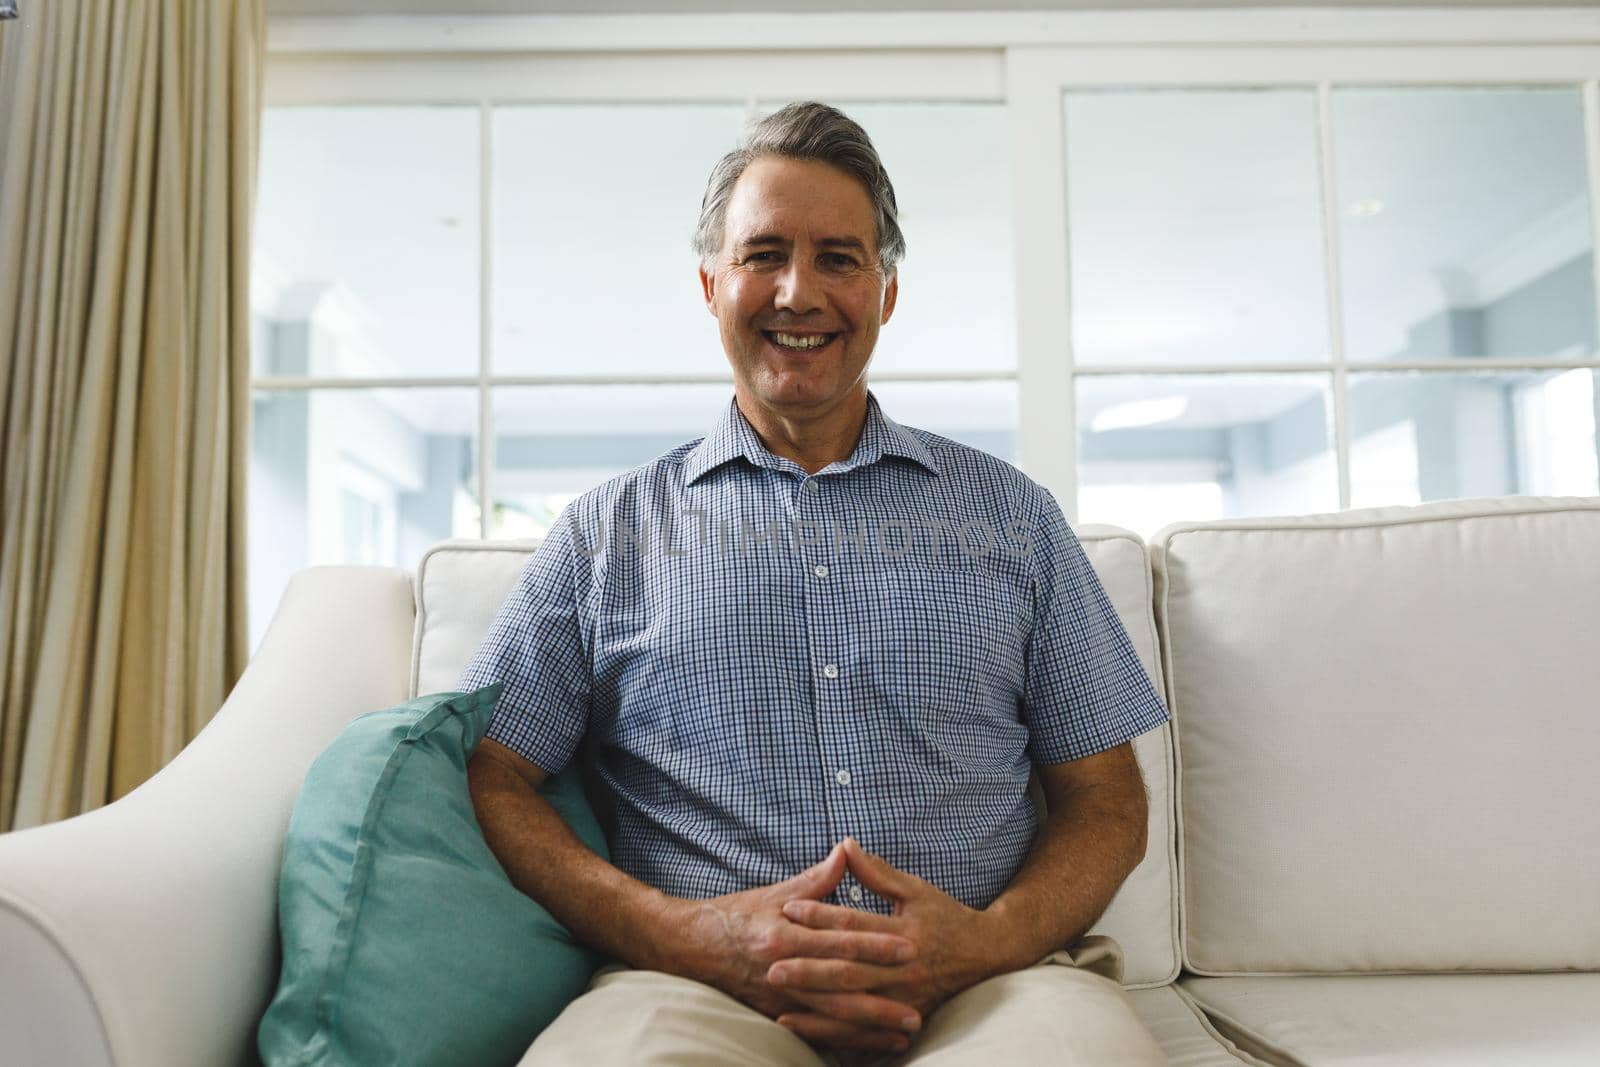 Happy senior caucasian man in living room, sitting on sofa smiling during video call by Wavebreakmedia